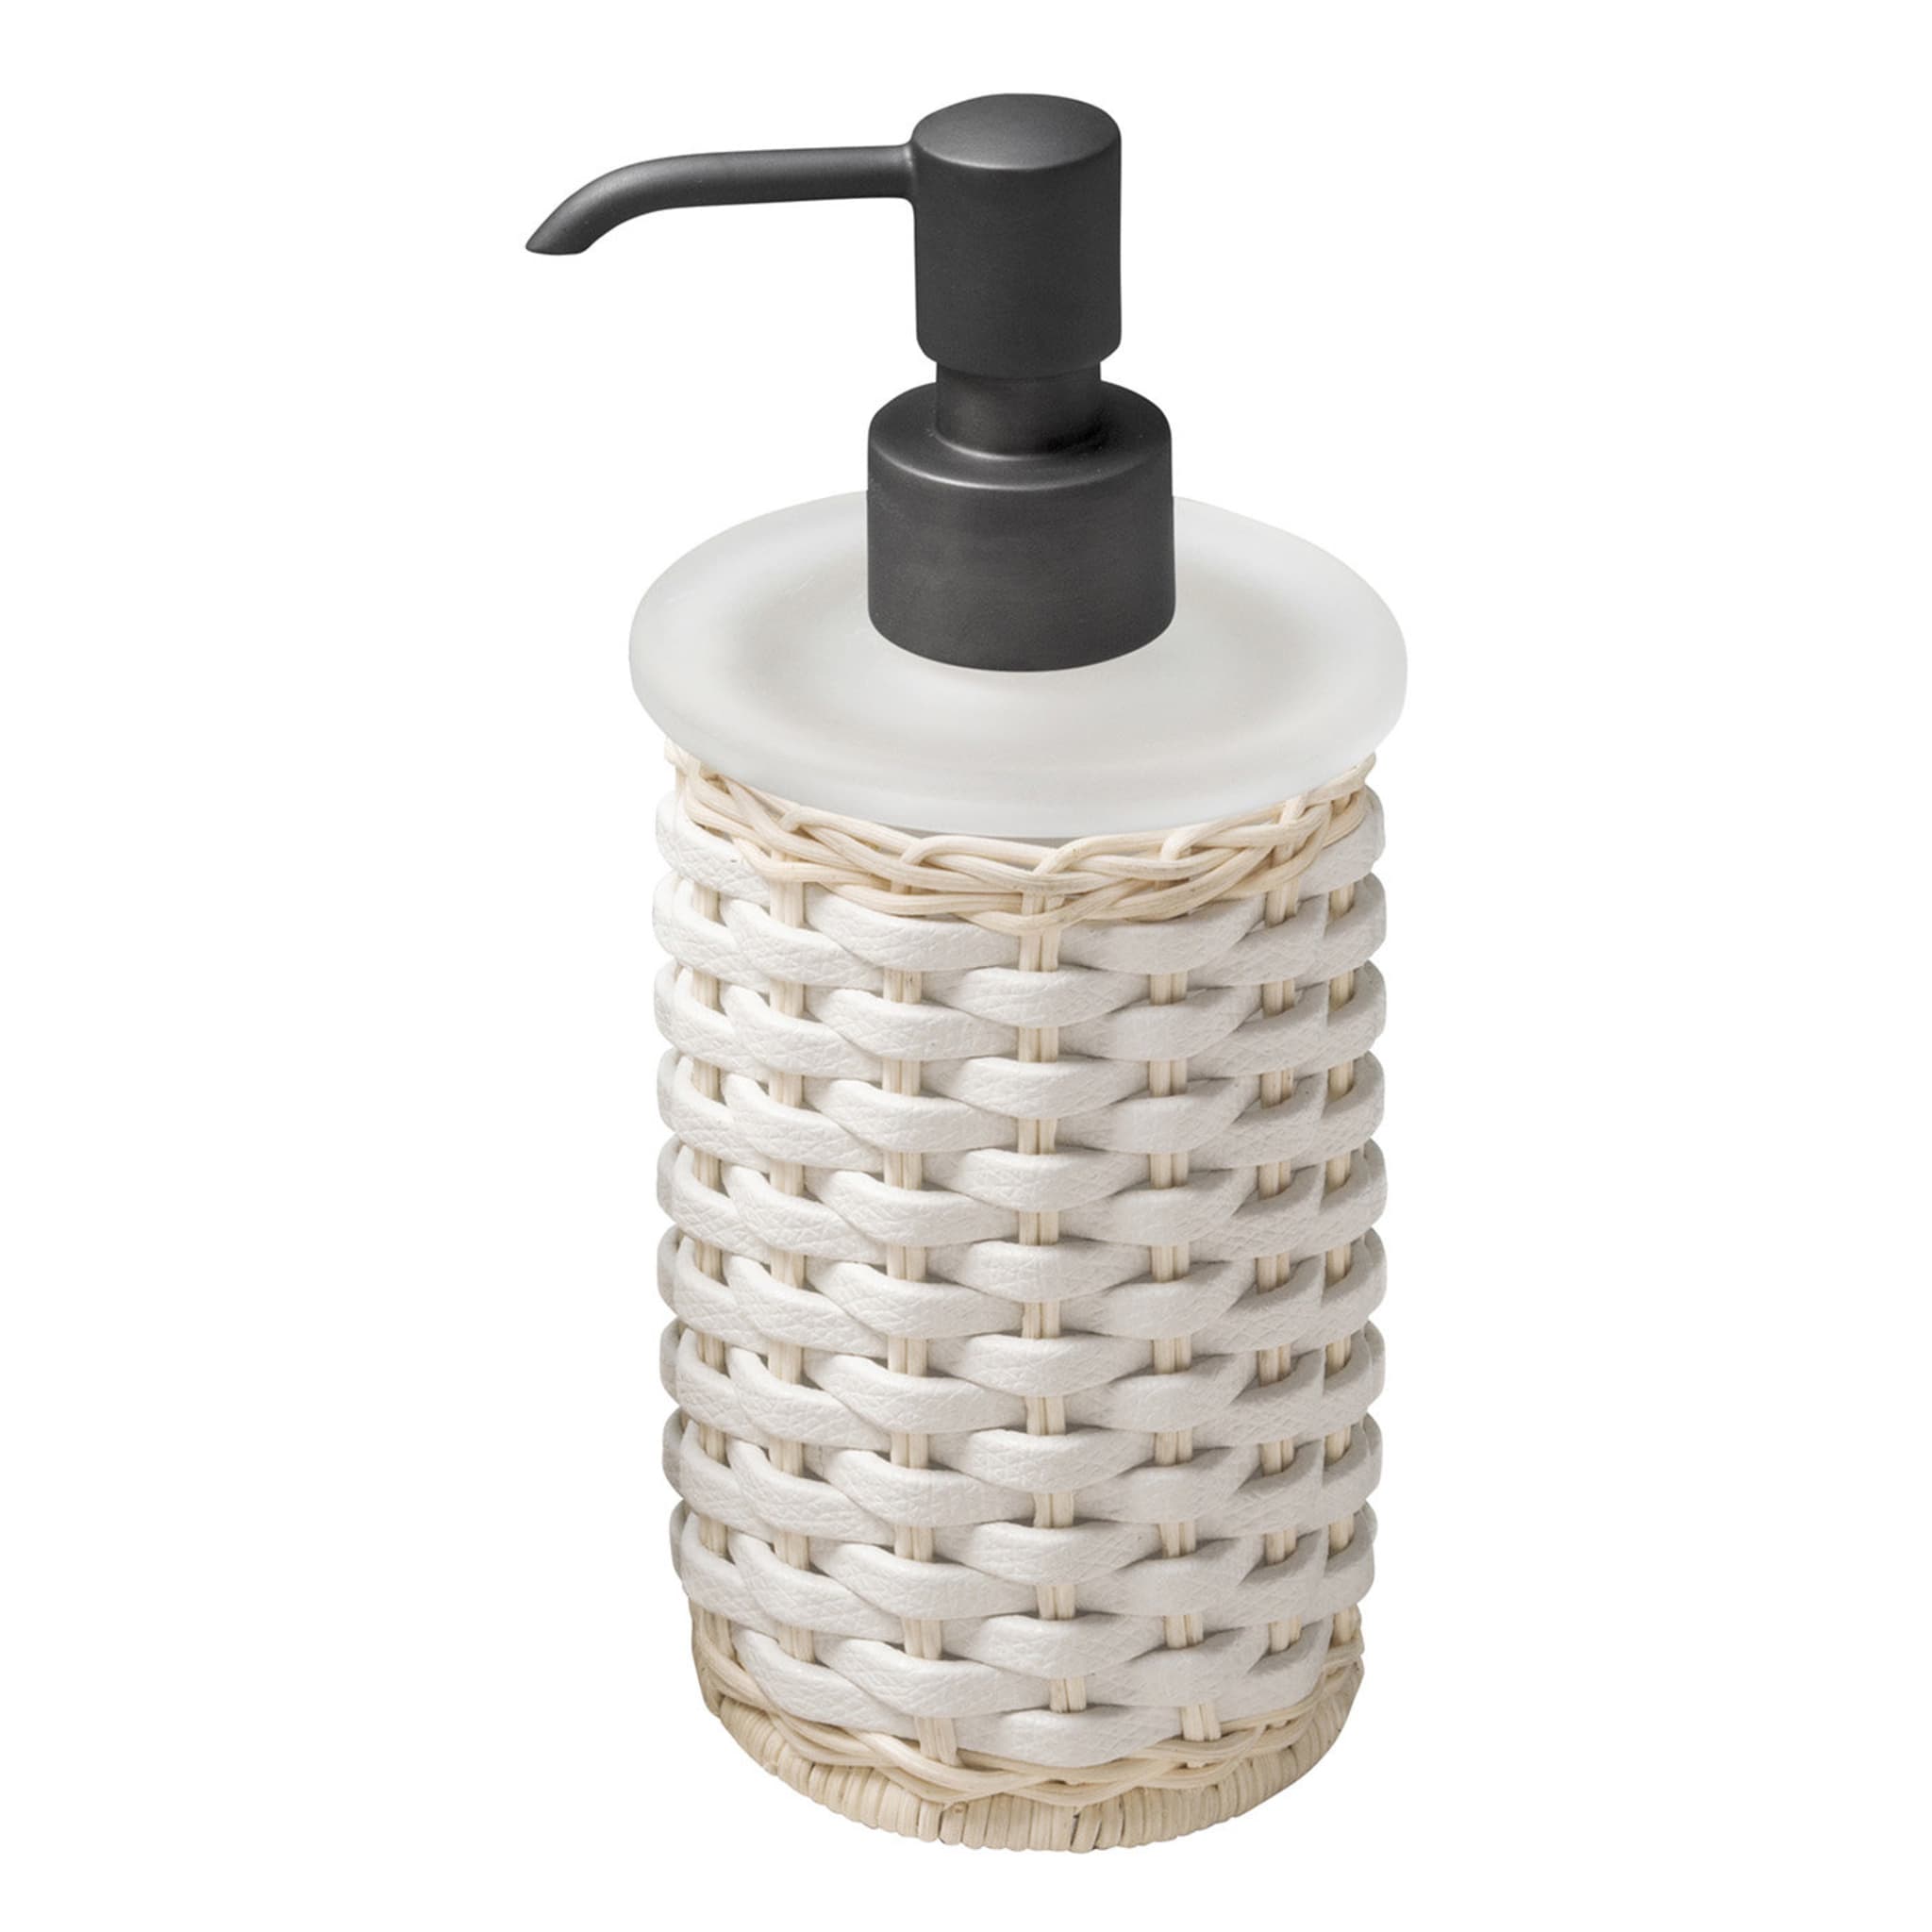 Calais White Leather & Rattan Soap Dispenser and Toothbrush Holder - Alternative view 2